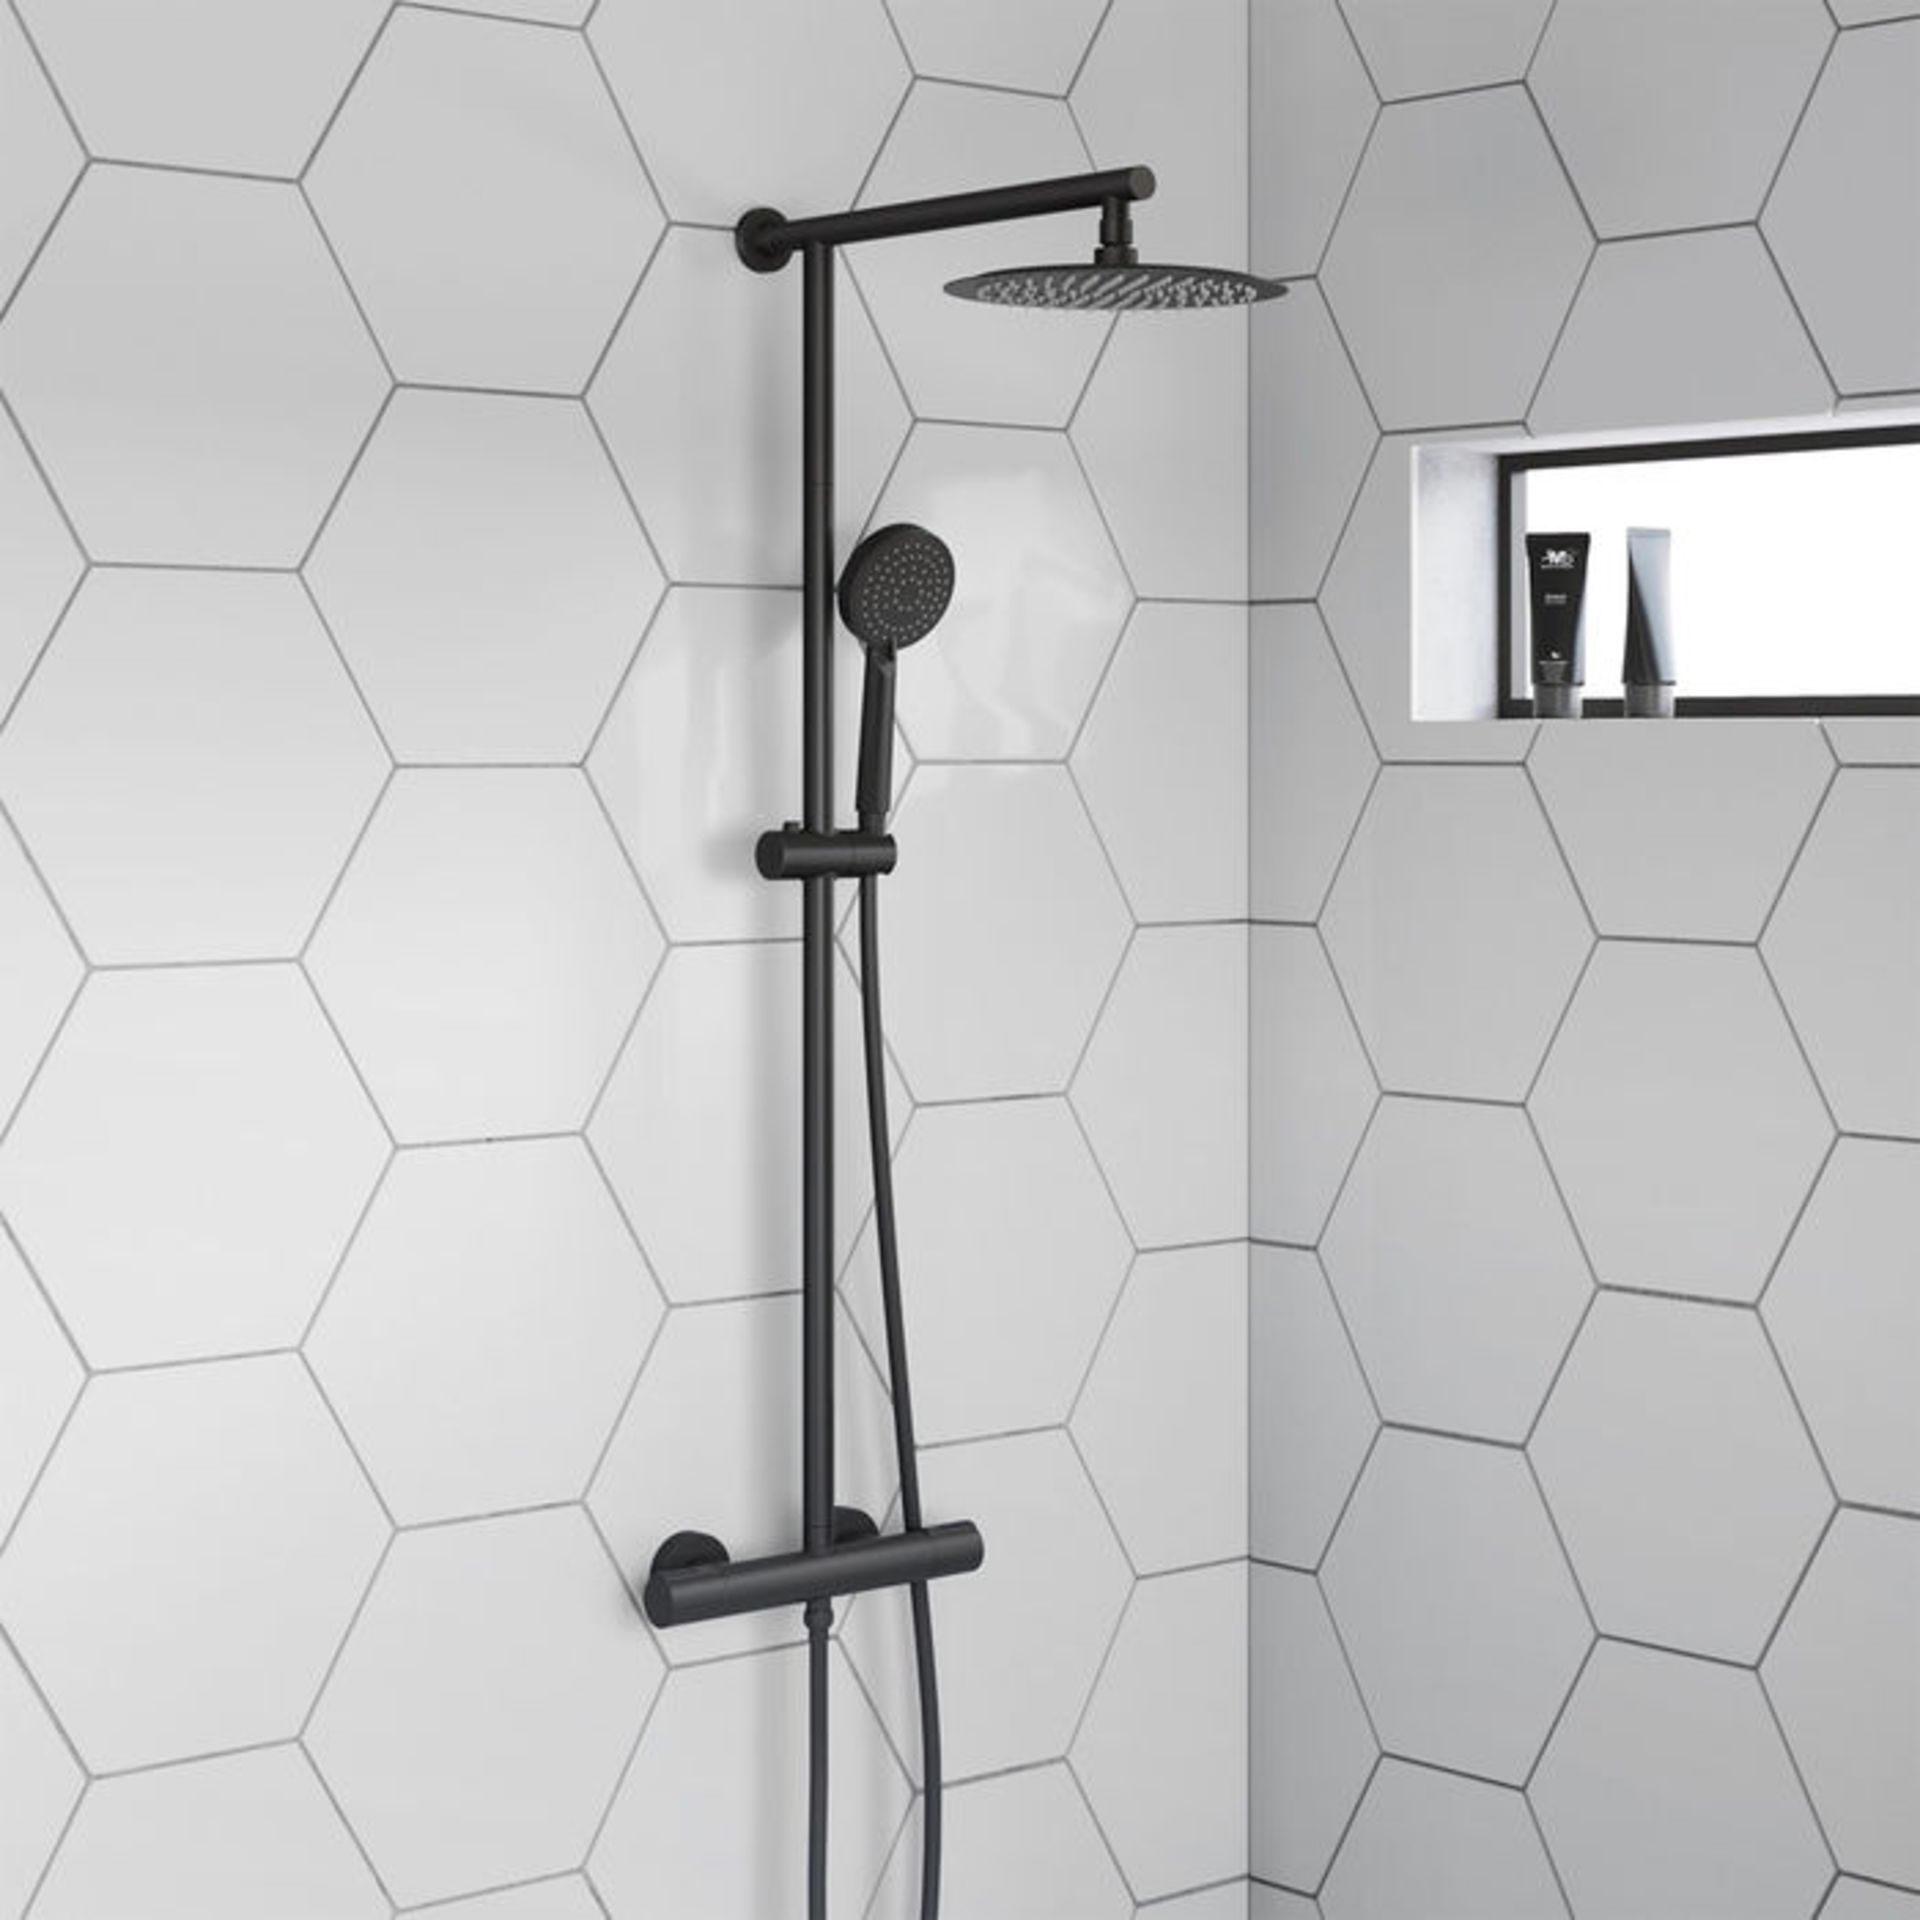 (MW35) Matte Black Round Exposed Thermostatic Shower Kit & Medium Head. RRP £349.99. Manufactured - Image 2 of 3